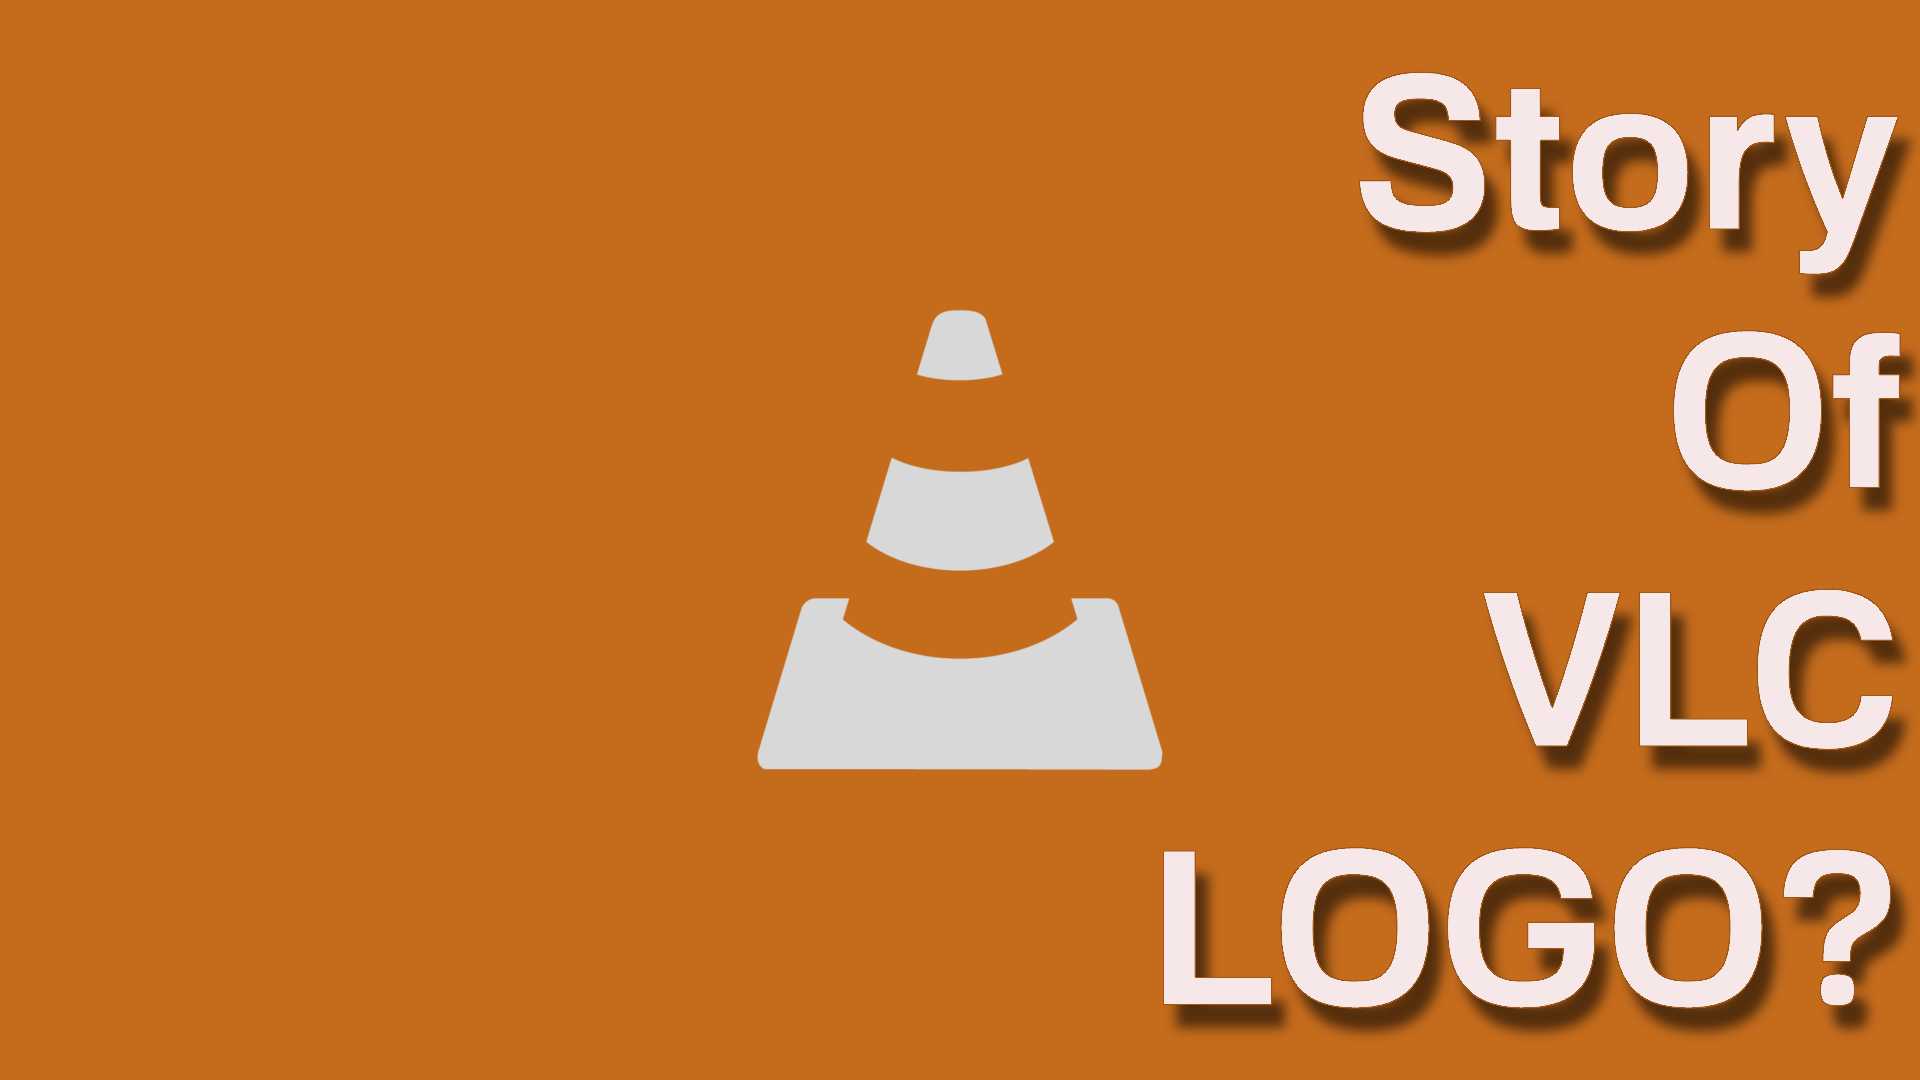 Traffic Cone Logo - Why VLC Player has a Traffic Cone as their logo? (This story makes ...